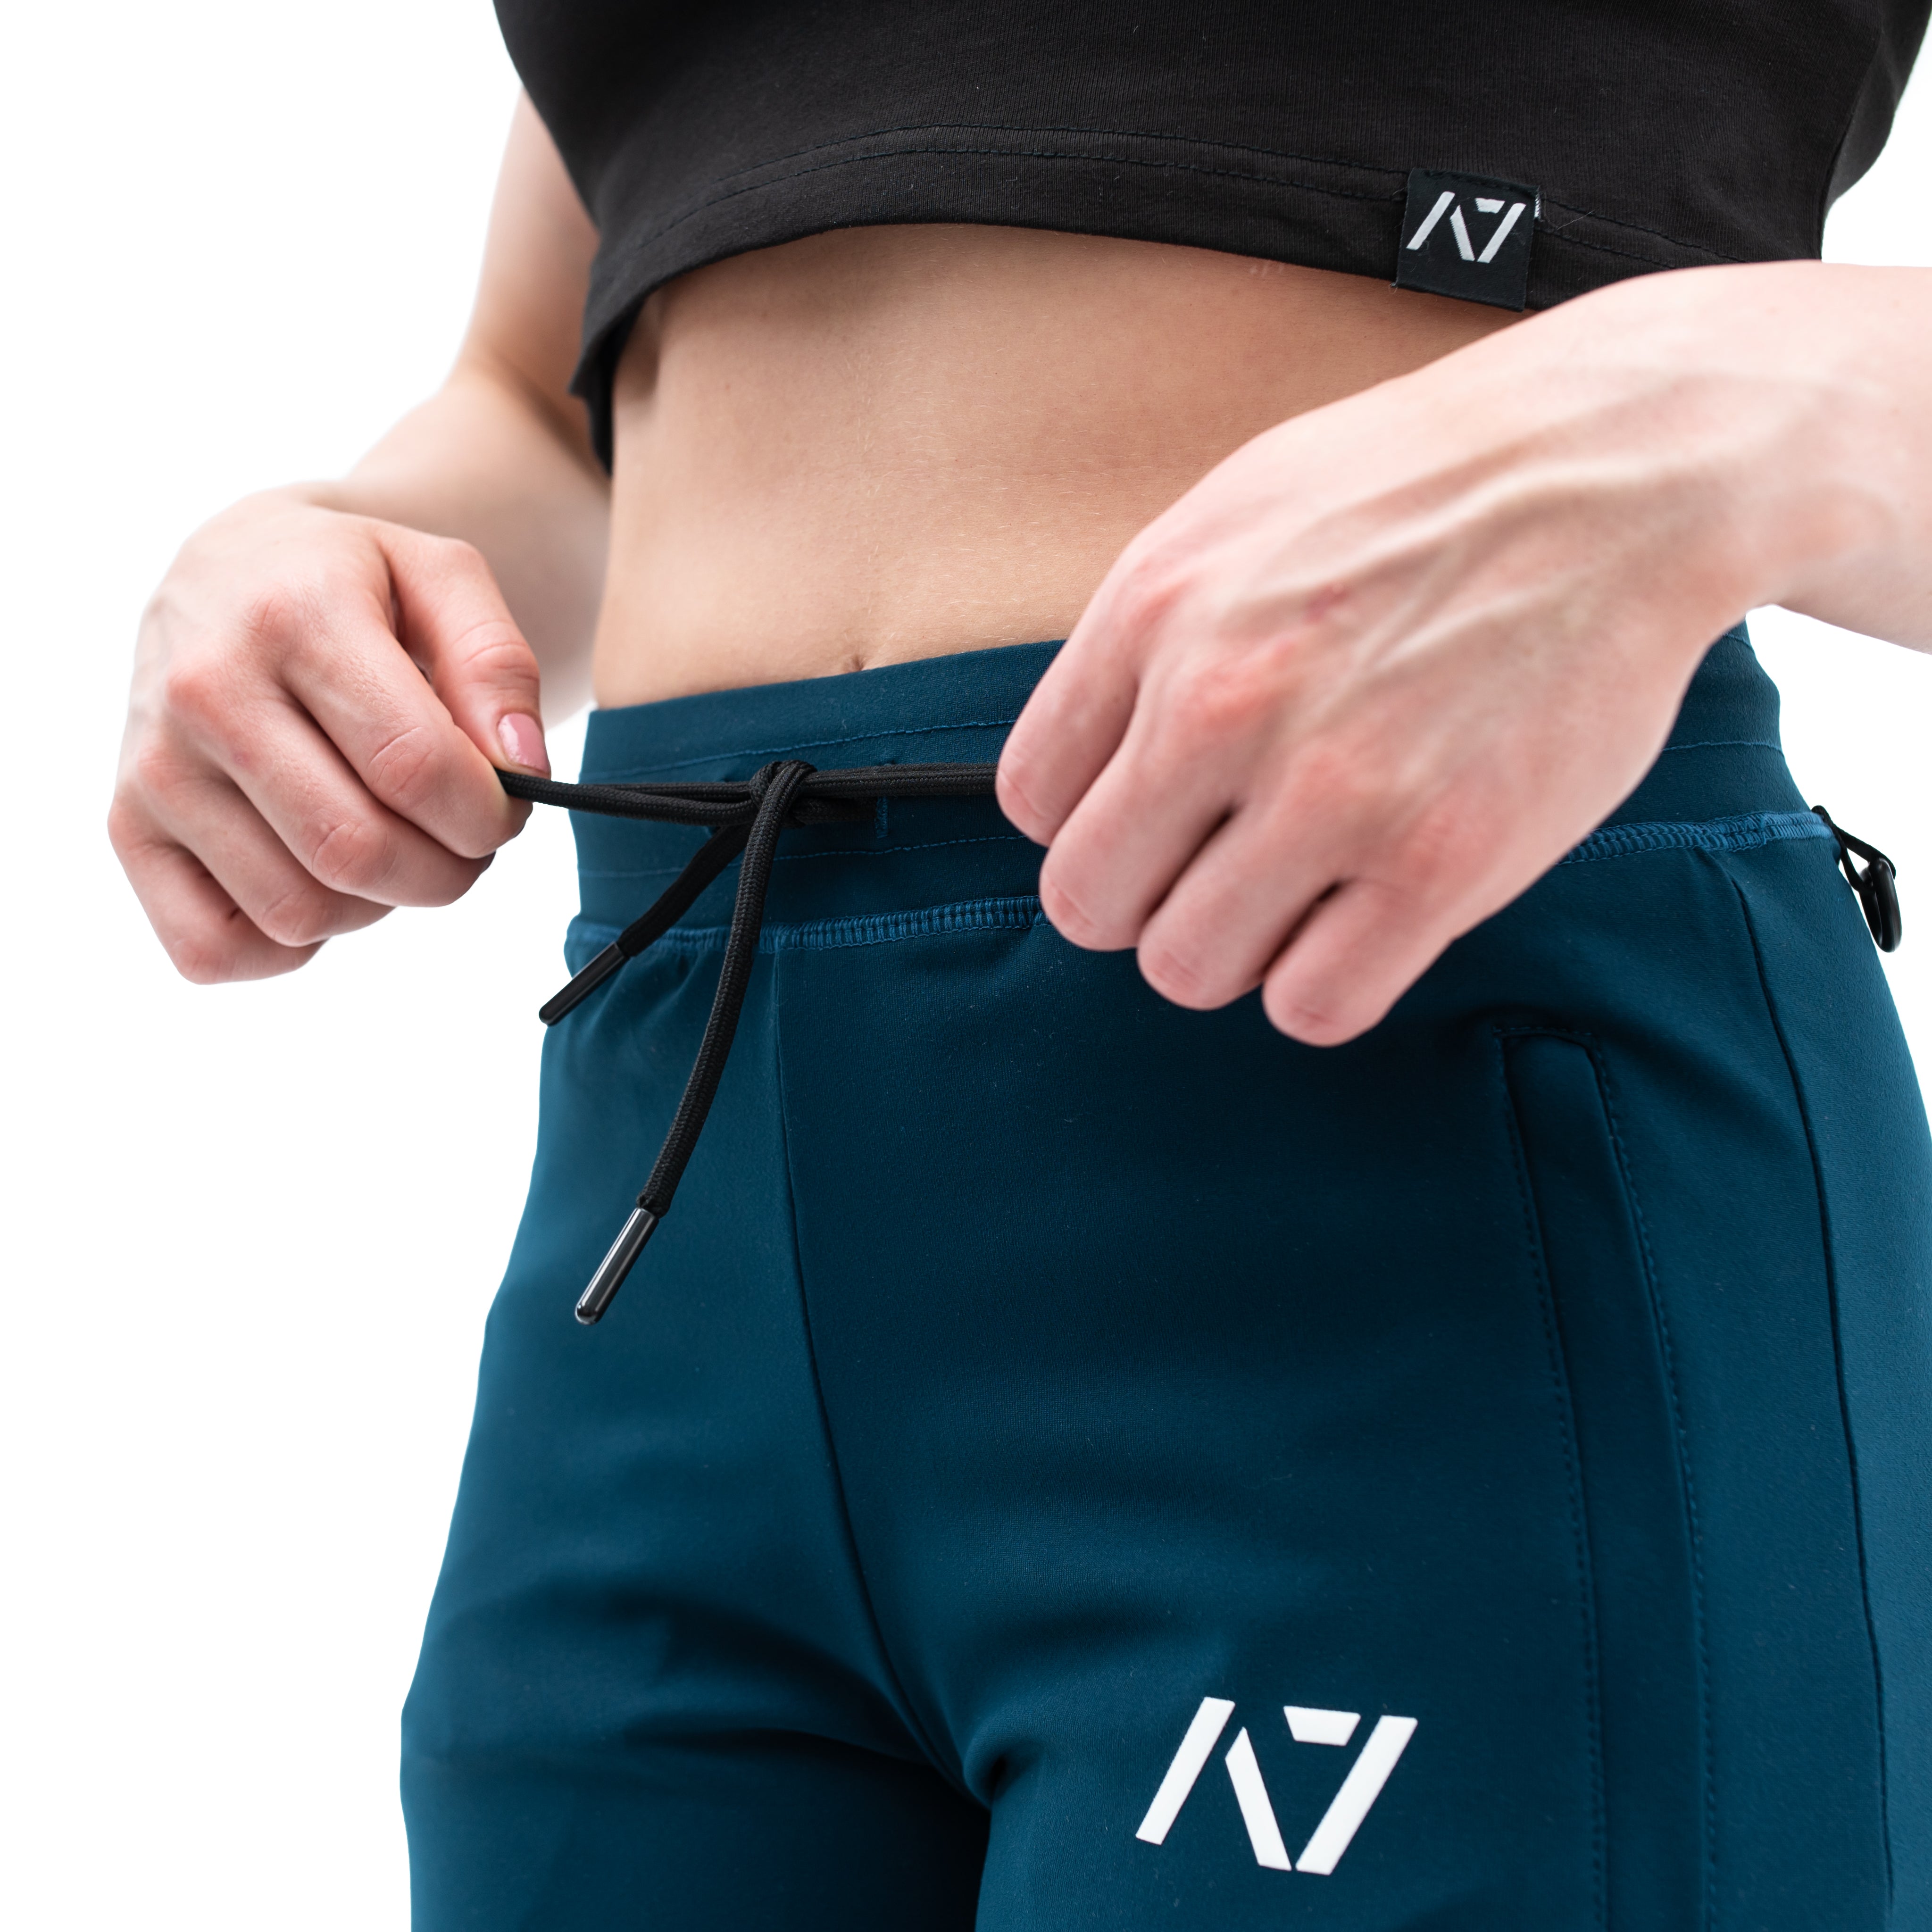 Defy joggers are just as comfortable in the gym as they are going out. These are made with premium moisture-wicking 4-way-stretch material for greater range of motion. These are a great fit for both men and women. Available in UK and Europe including France, Italy, Germany, Sweden and Poland.